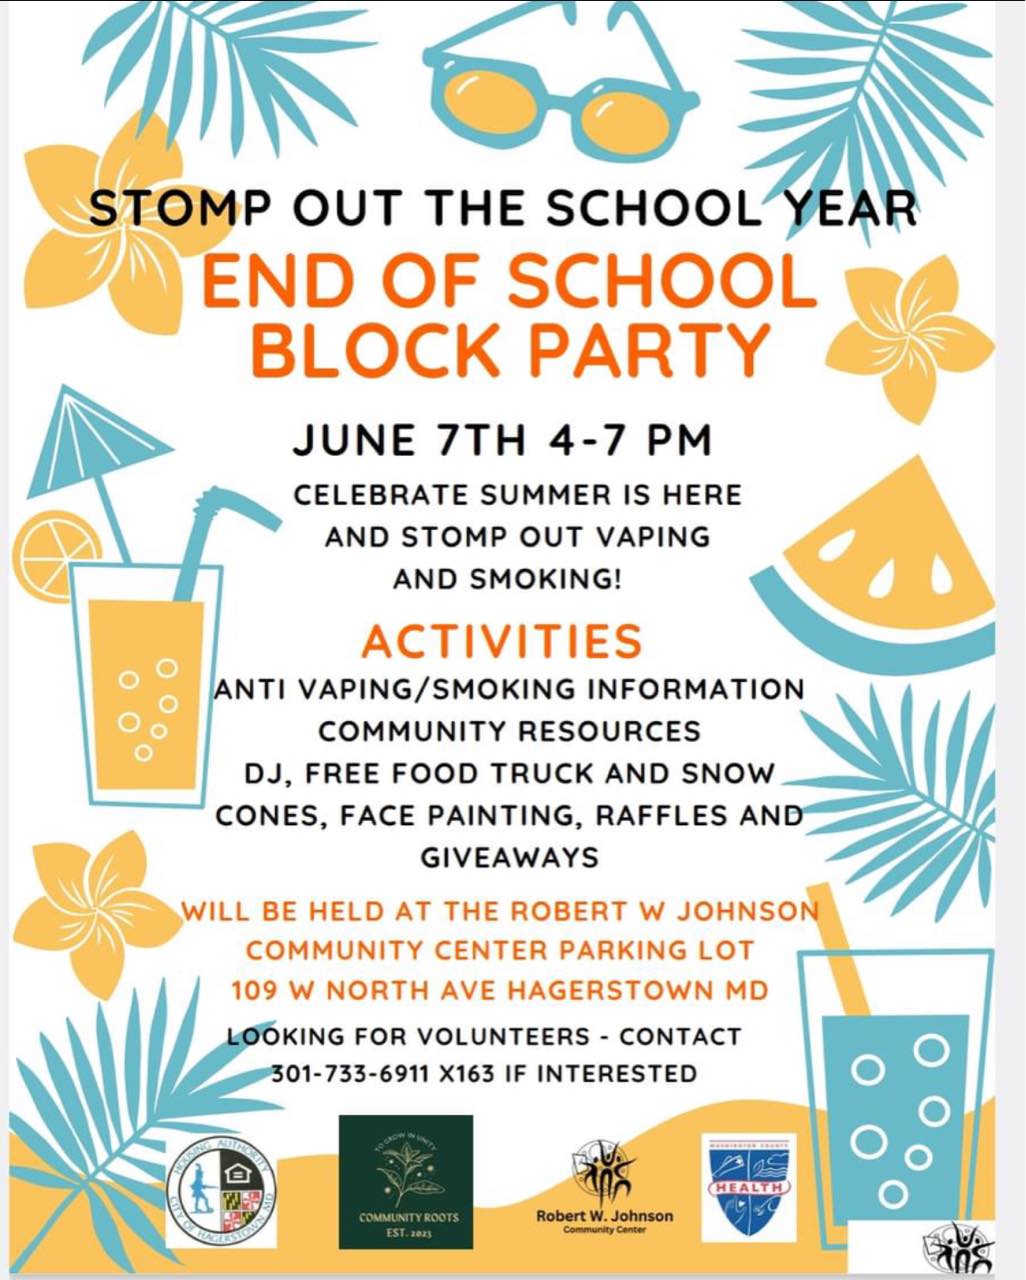 Image: White box filled with illustrations of items related to summer, including sunglasses, fruity drinks, watermelon, etc. Logos for health dept., Hagerstown Housing Authority, Community Roots and RWJ Community Center. Text: End of School Block Party. Details in event posting.